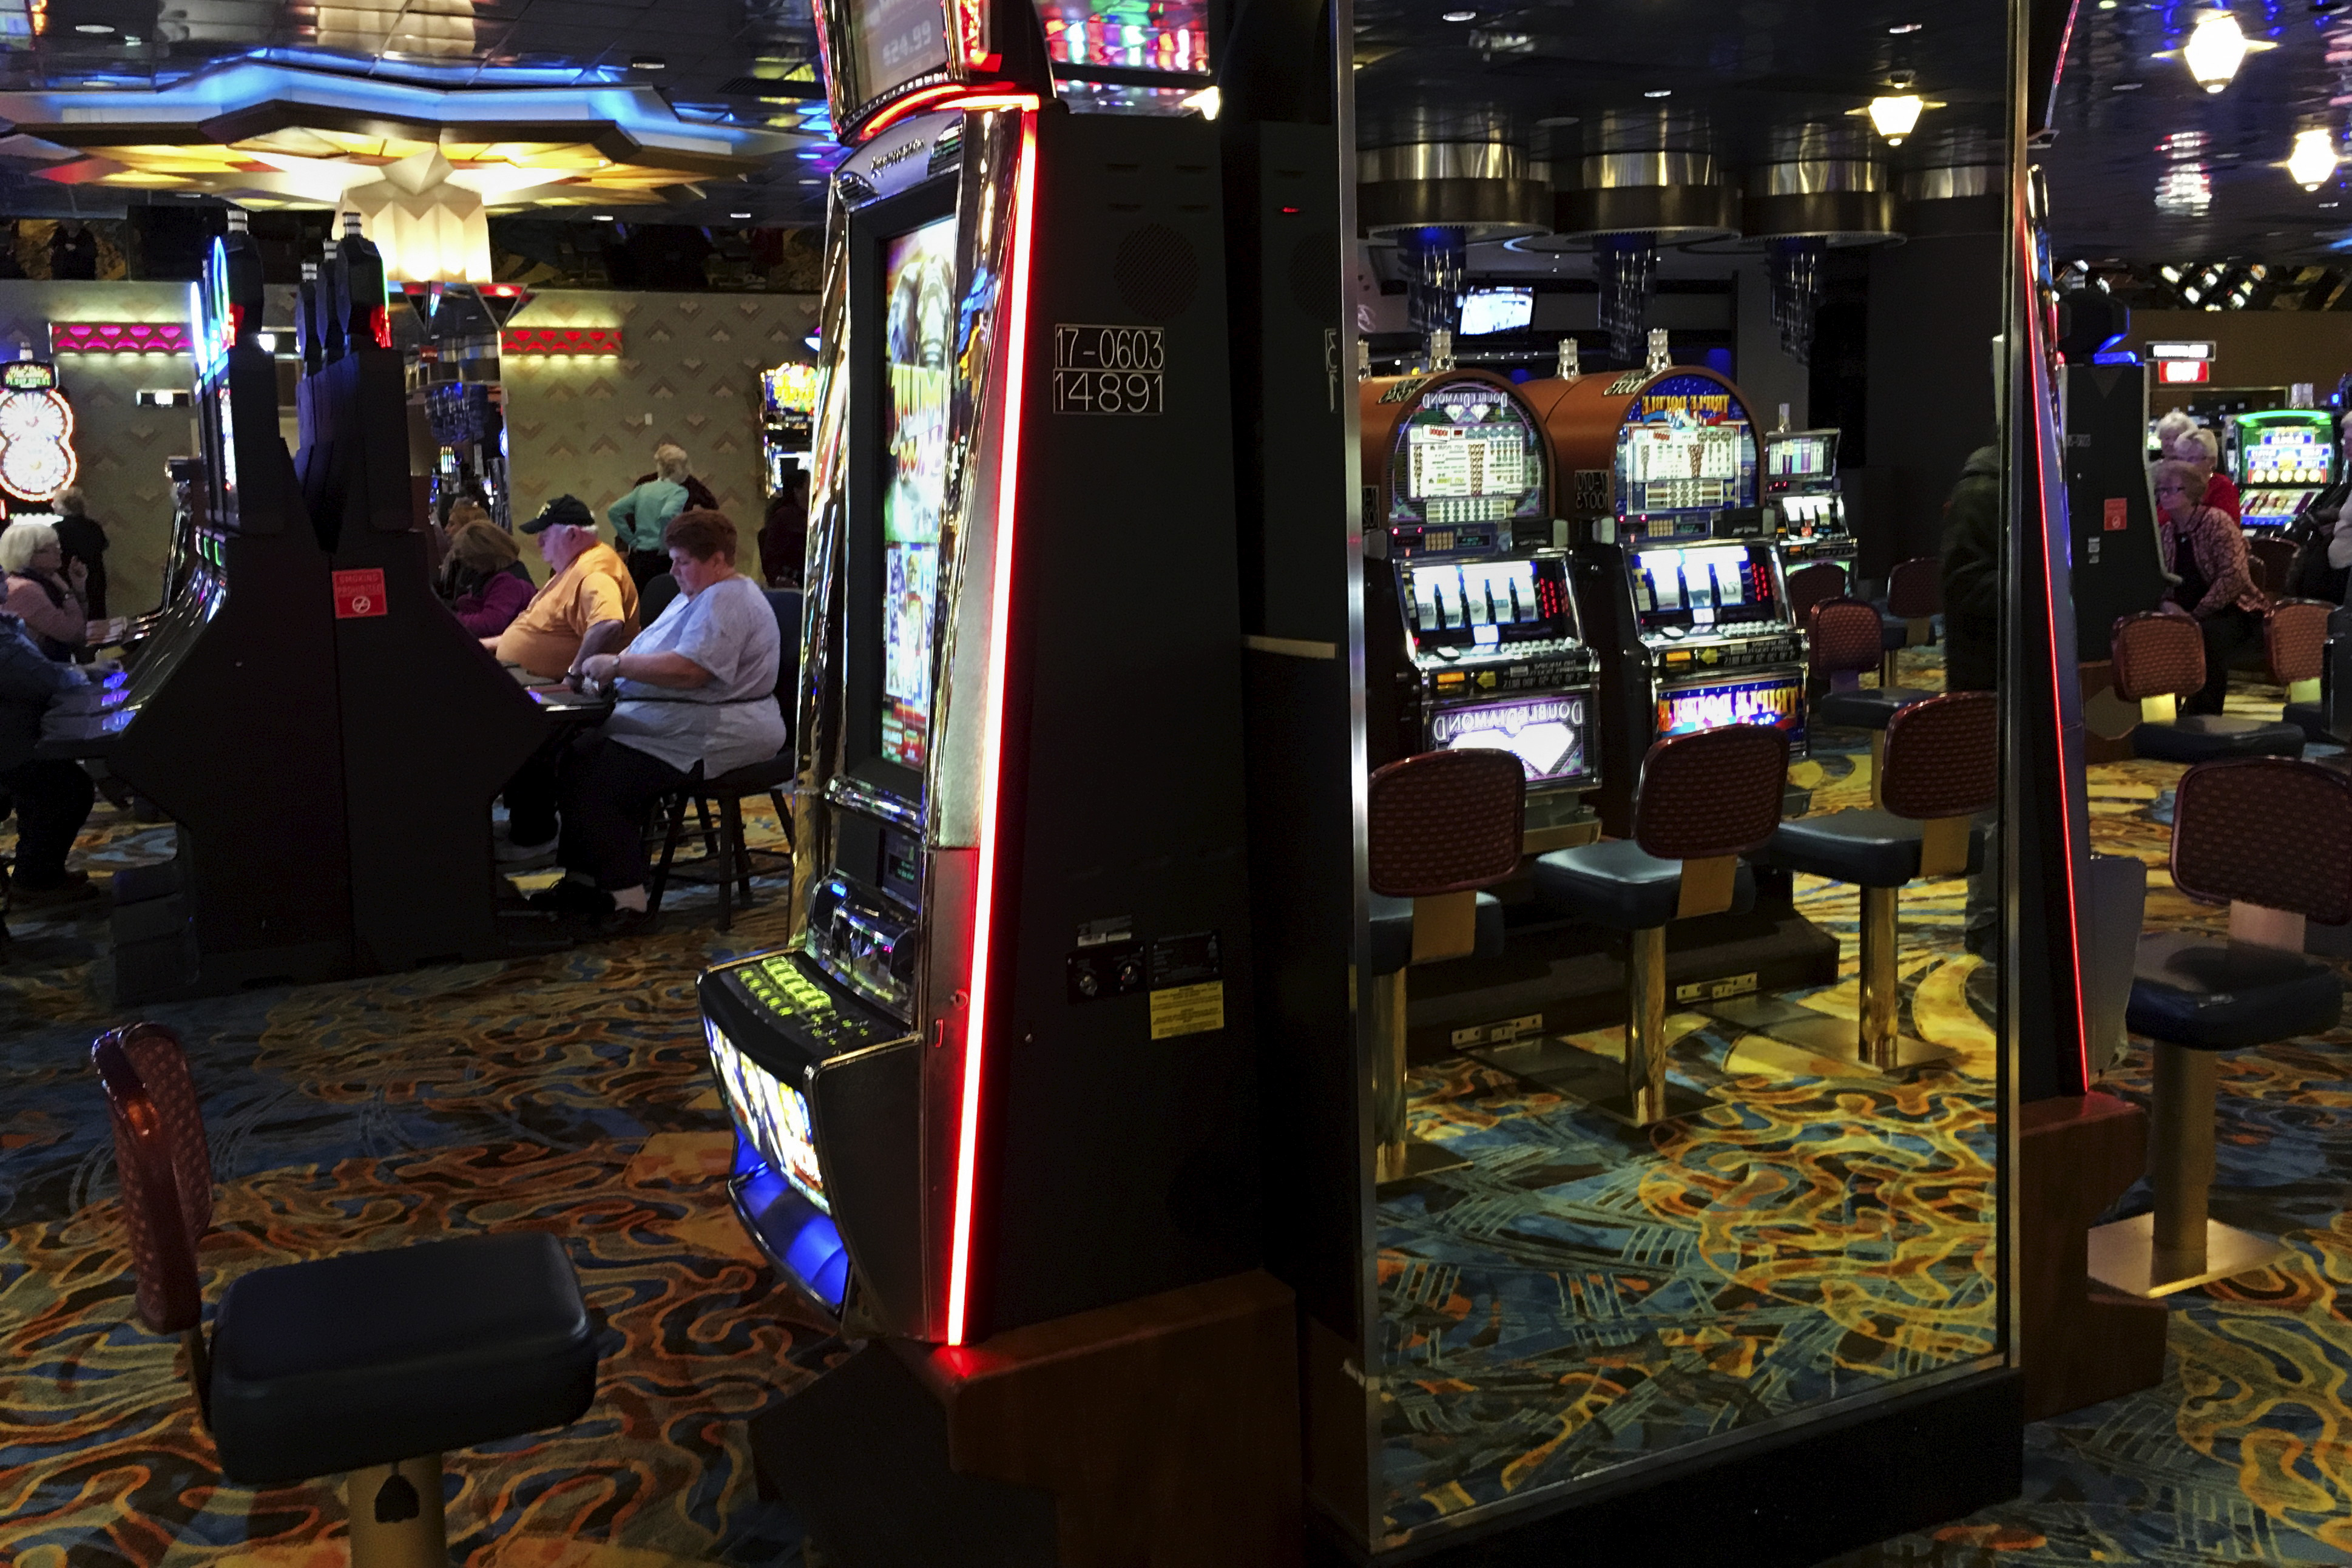 People play slot machines inside a casino in Atlantic City